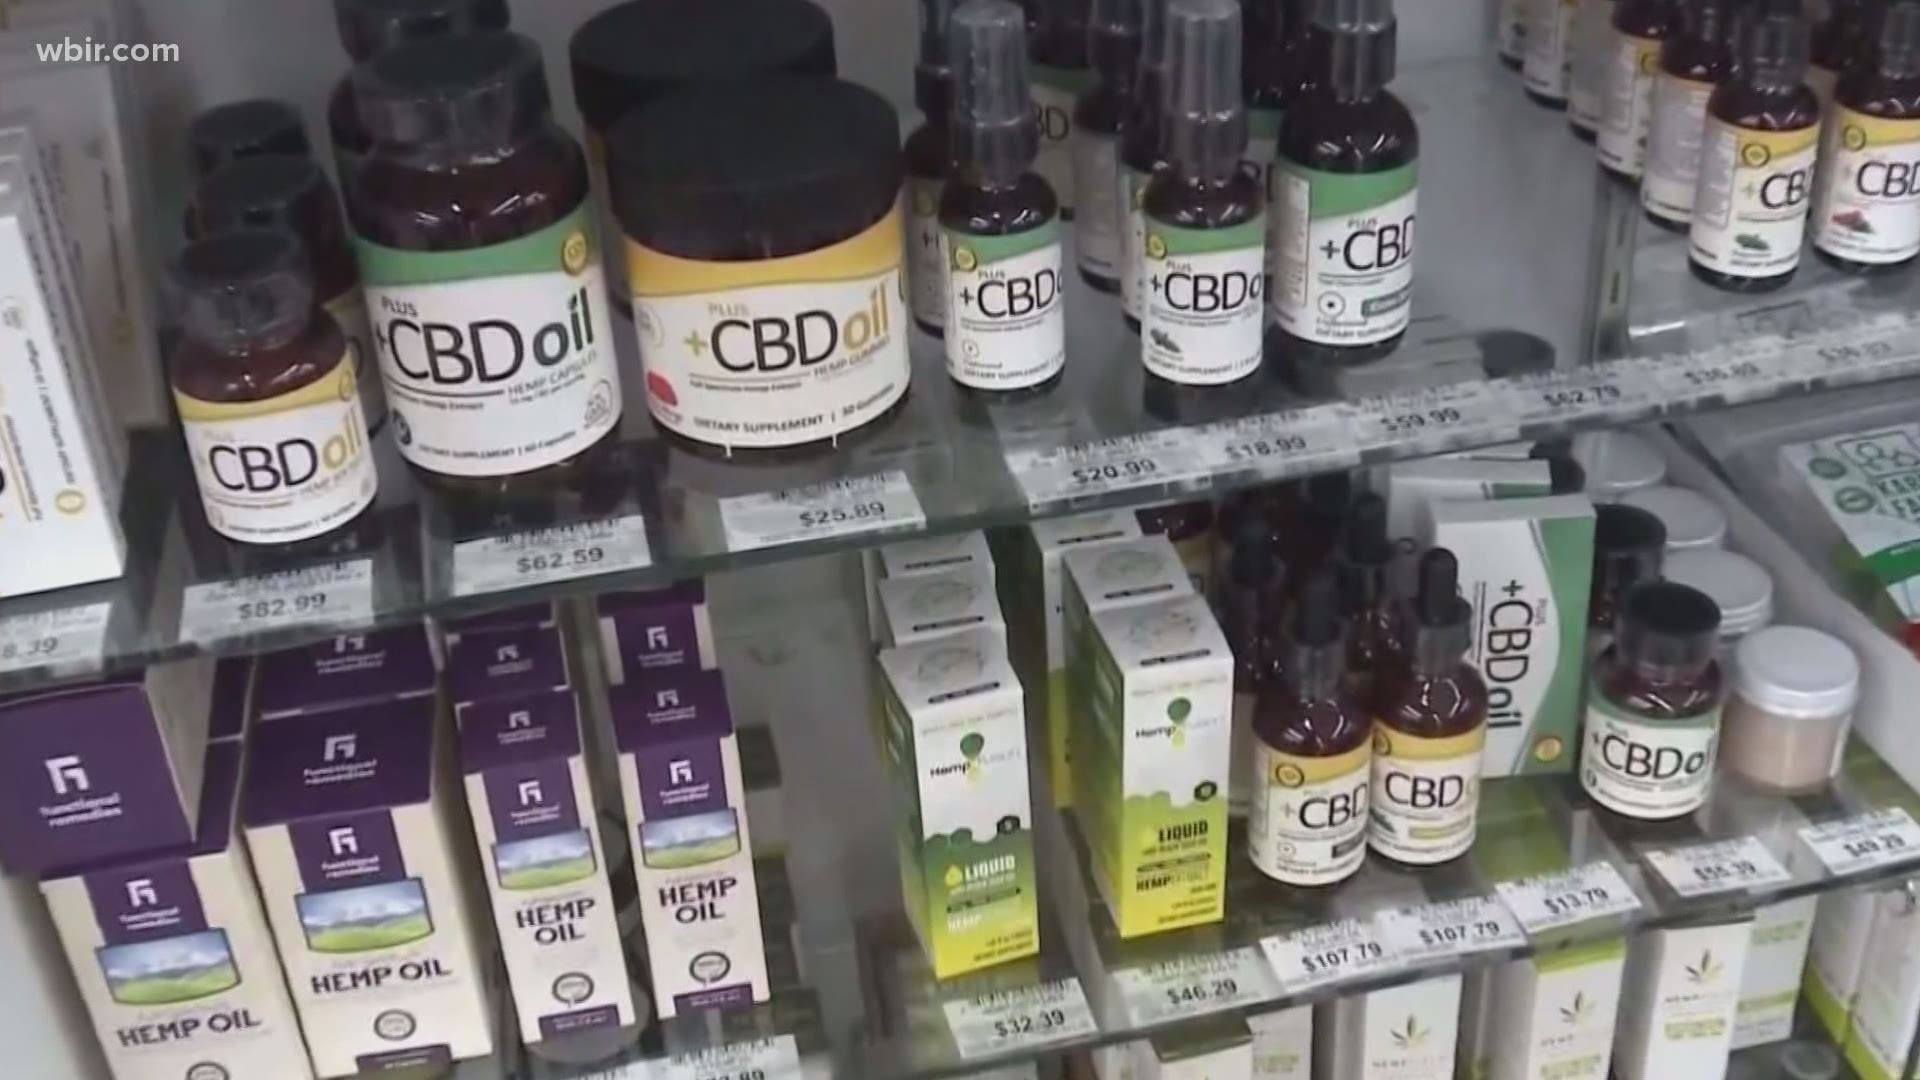 Word spread fast about how CBD could relieve pain and stresses, putting a pandemic on top of that helped spread the word even faster.